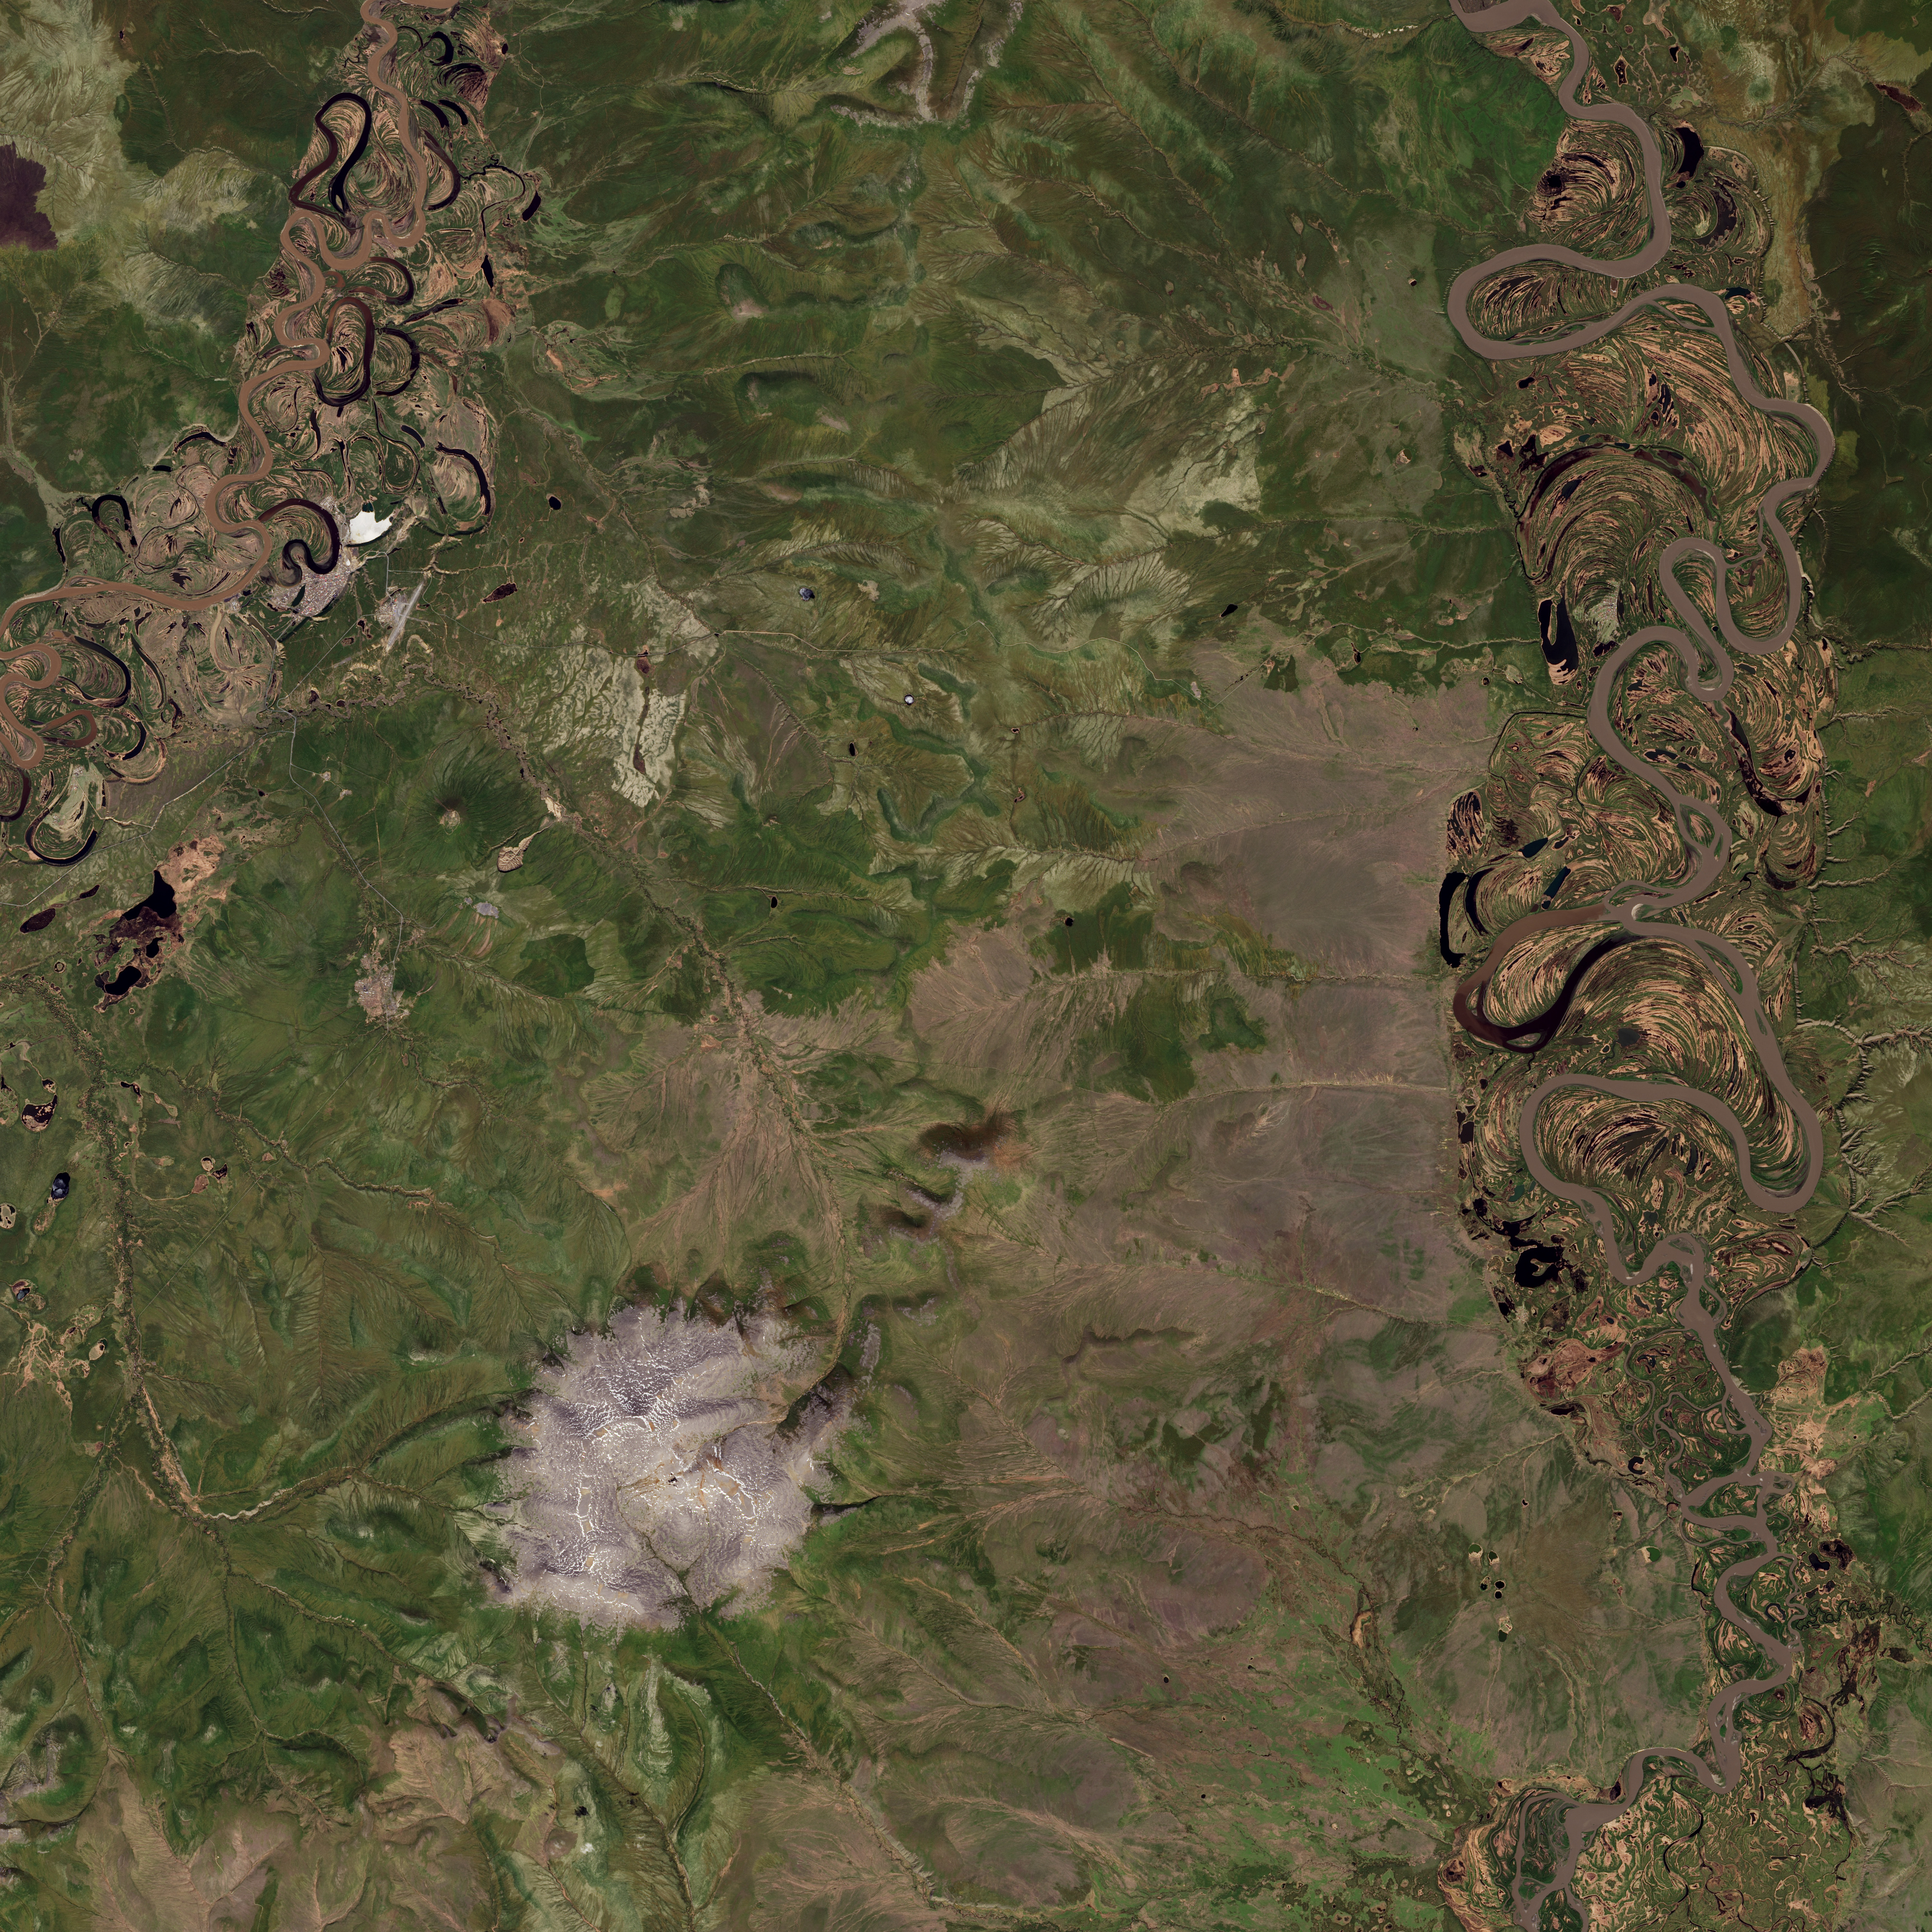 Batagaika Crater Expands - related image preview